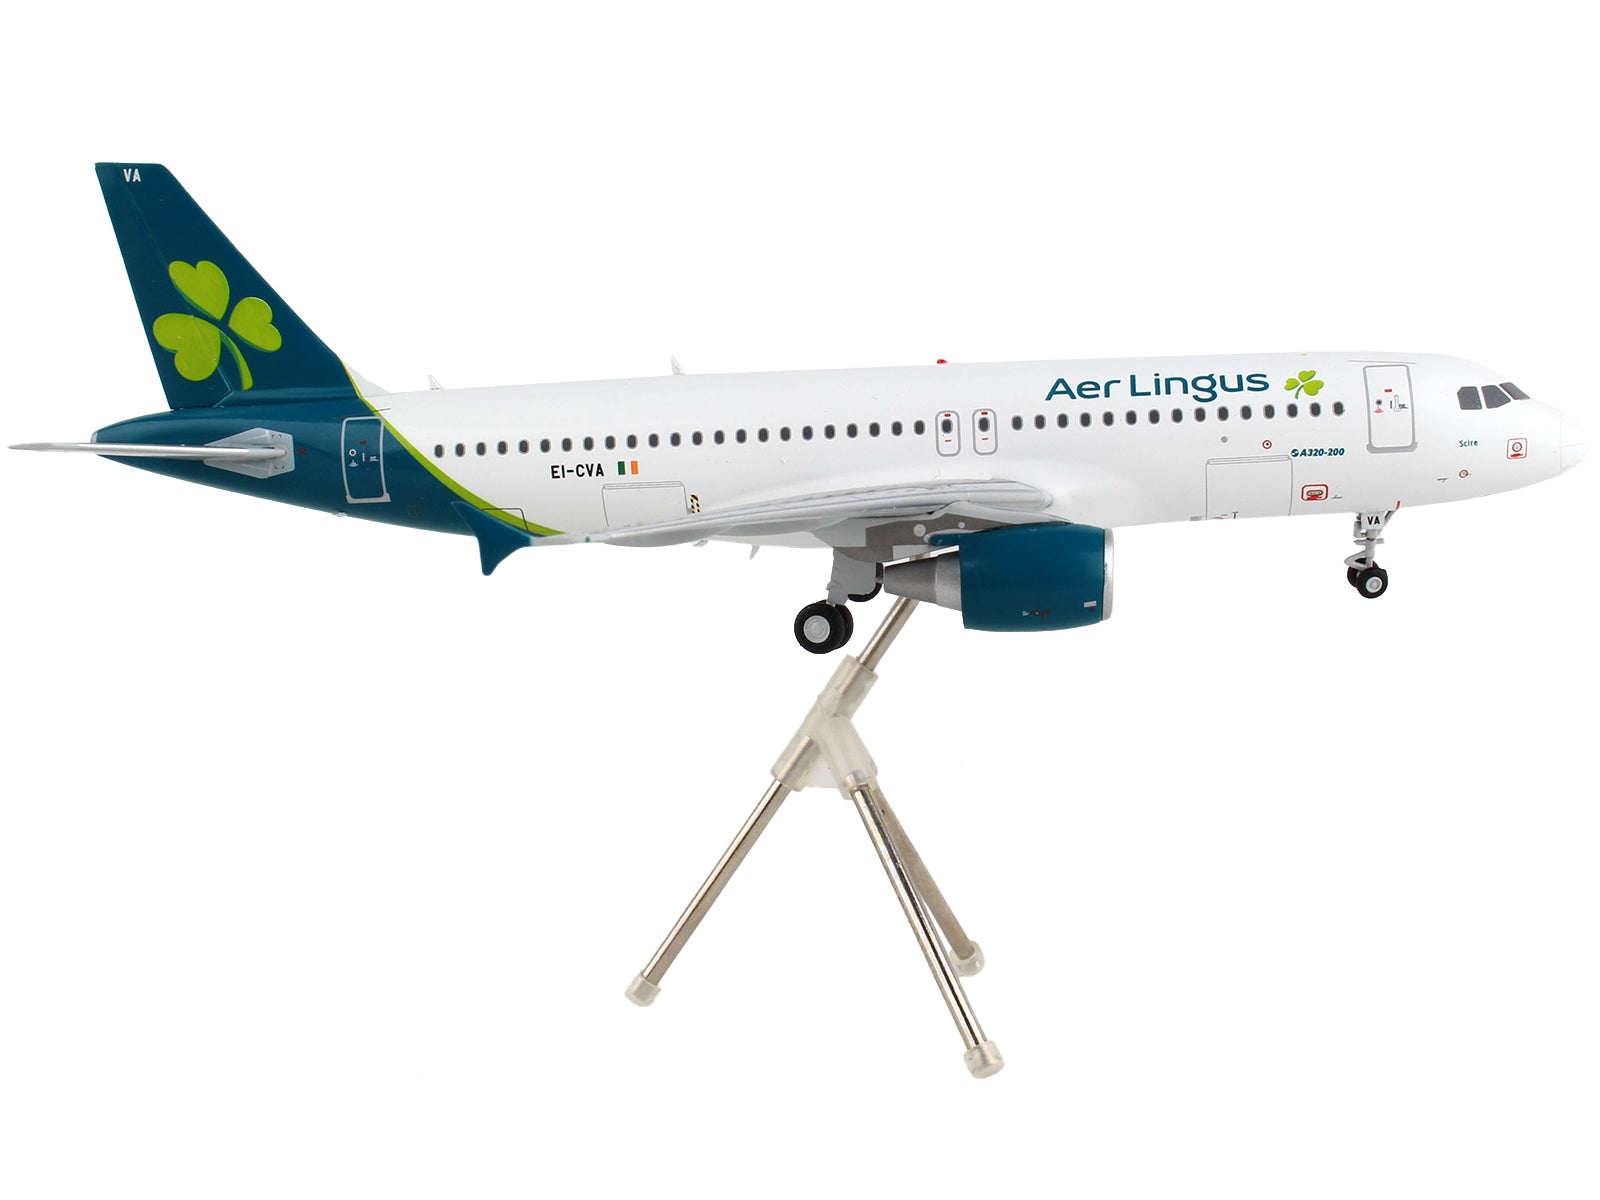 Airbus A320 Commercial Aircraft "Aer Lingus" White with Teal Tail "Gemini 200" Series 1/200 Diecast Model Airplane by GeminiJets